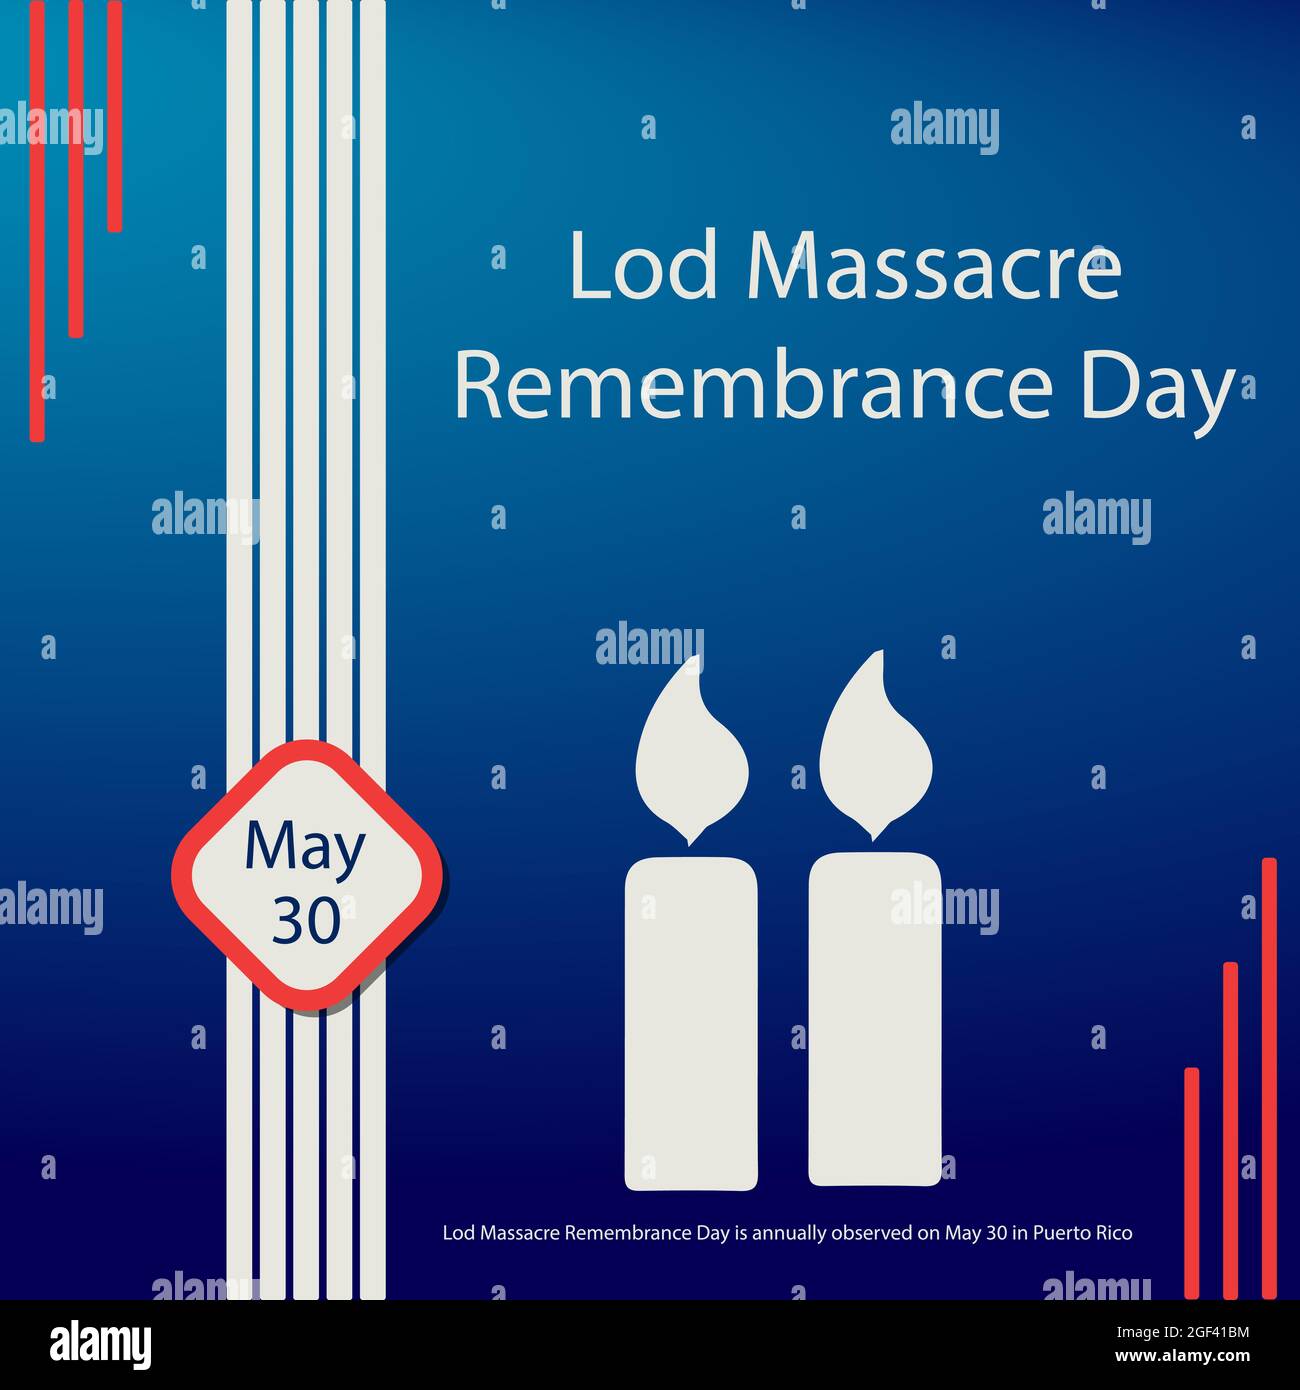 Lod Massacre Remembrance Day is annually observed on May 30 in Puerto Rico. Stock Vector